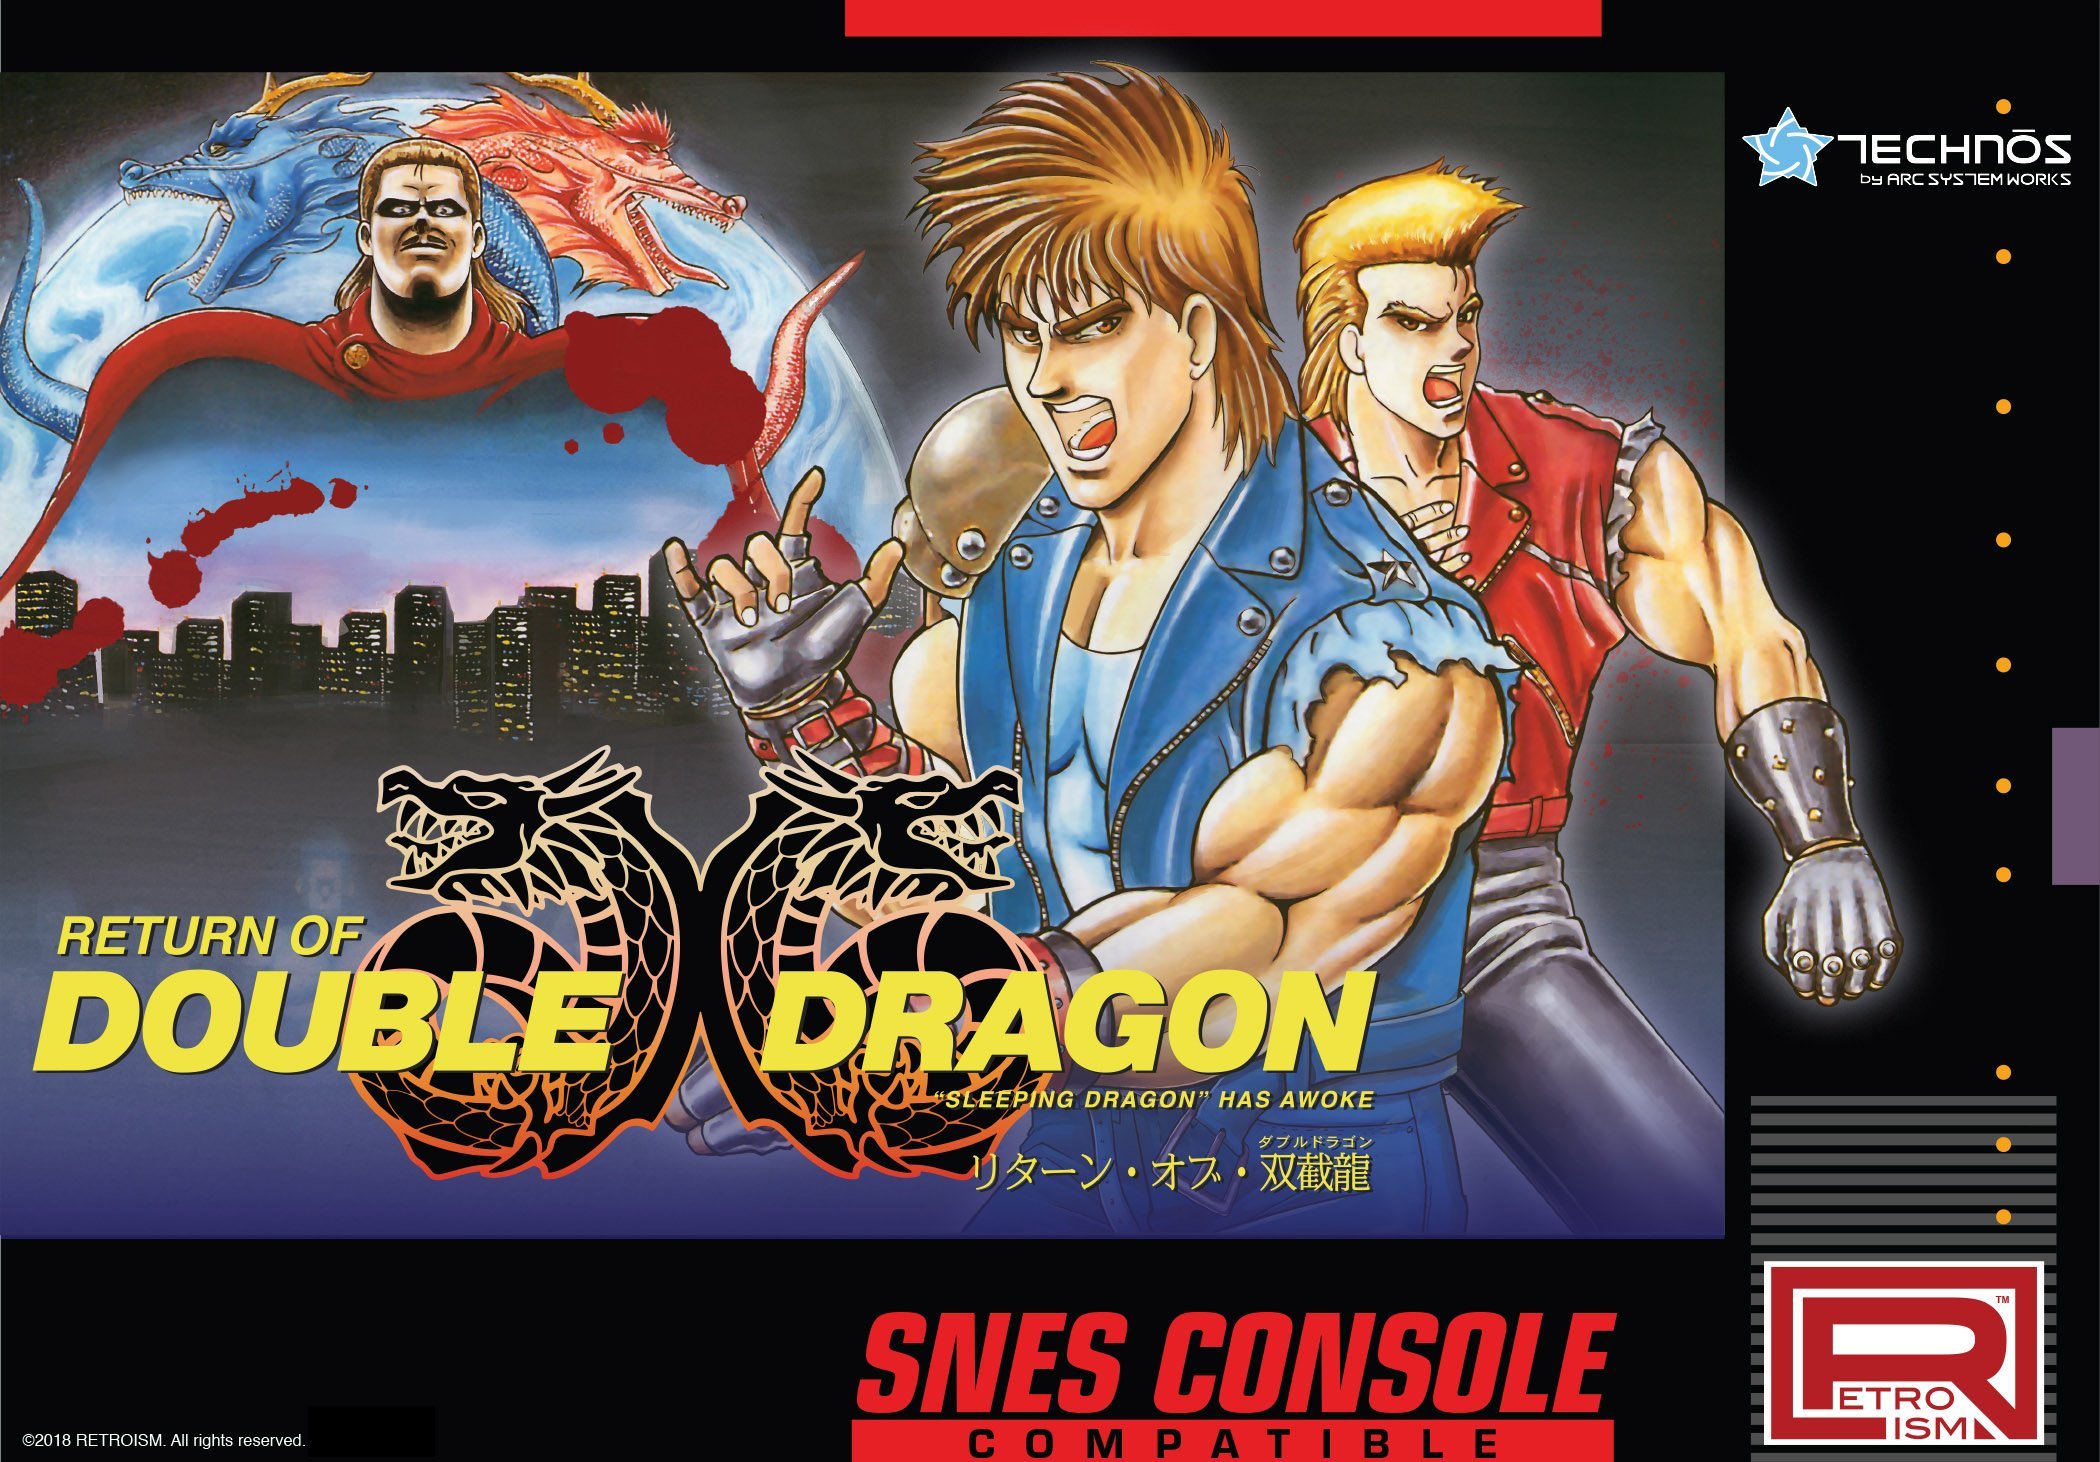 double dragon video game stages